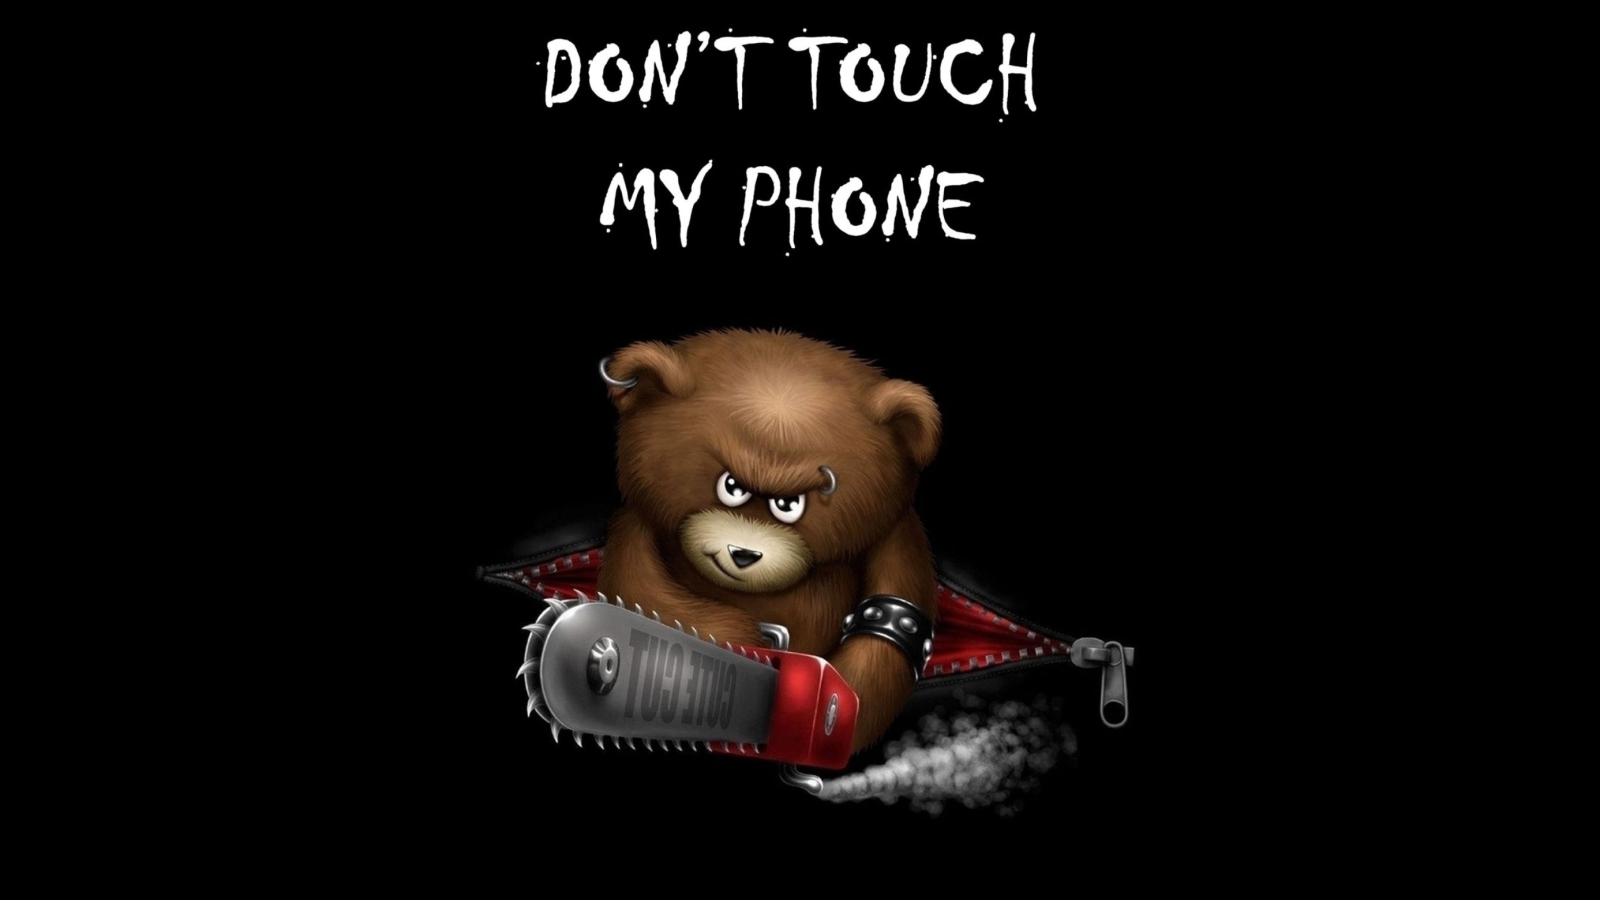 Dont Touch My Phone wallpaper 1600x900